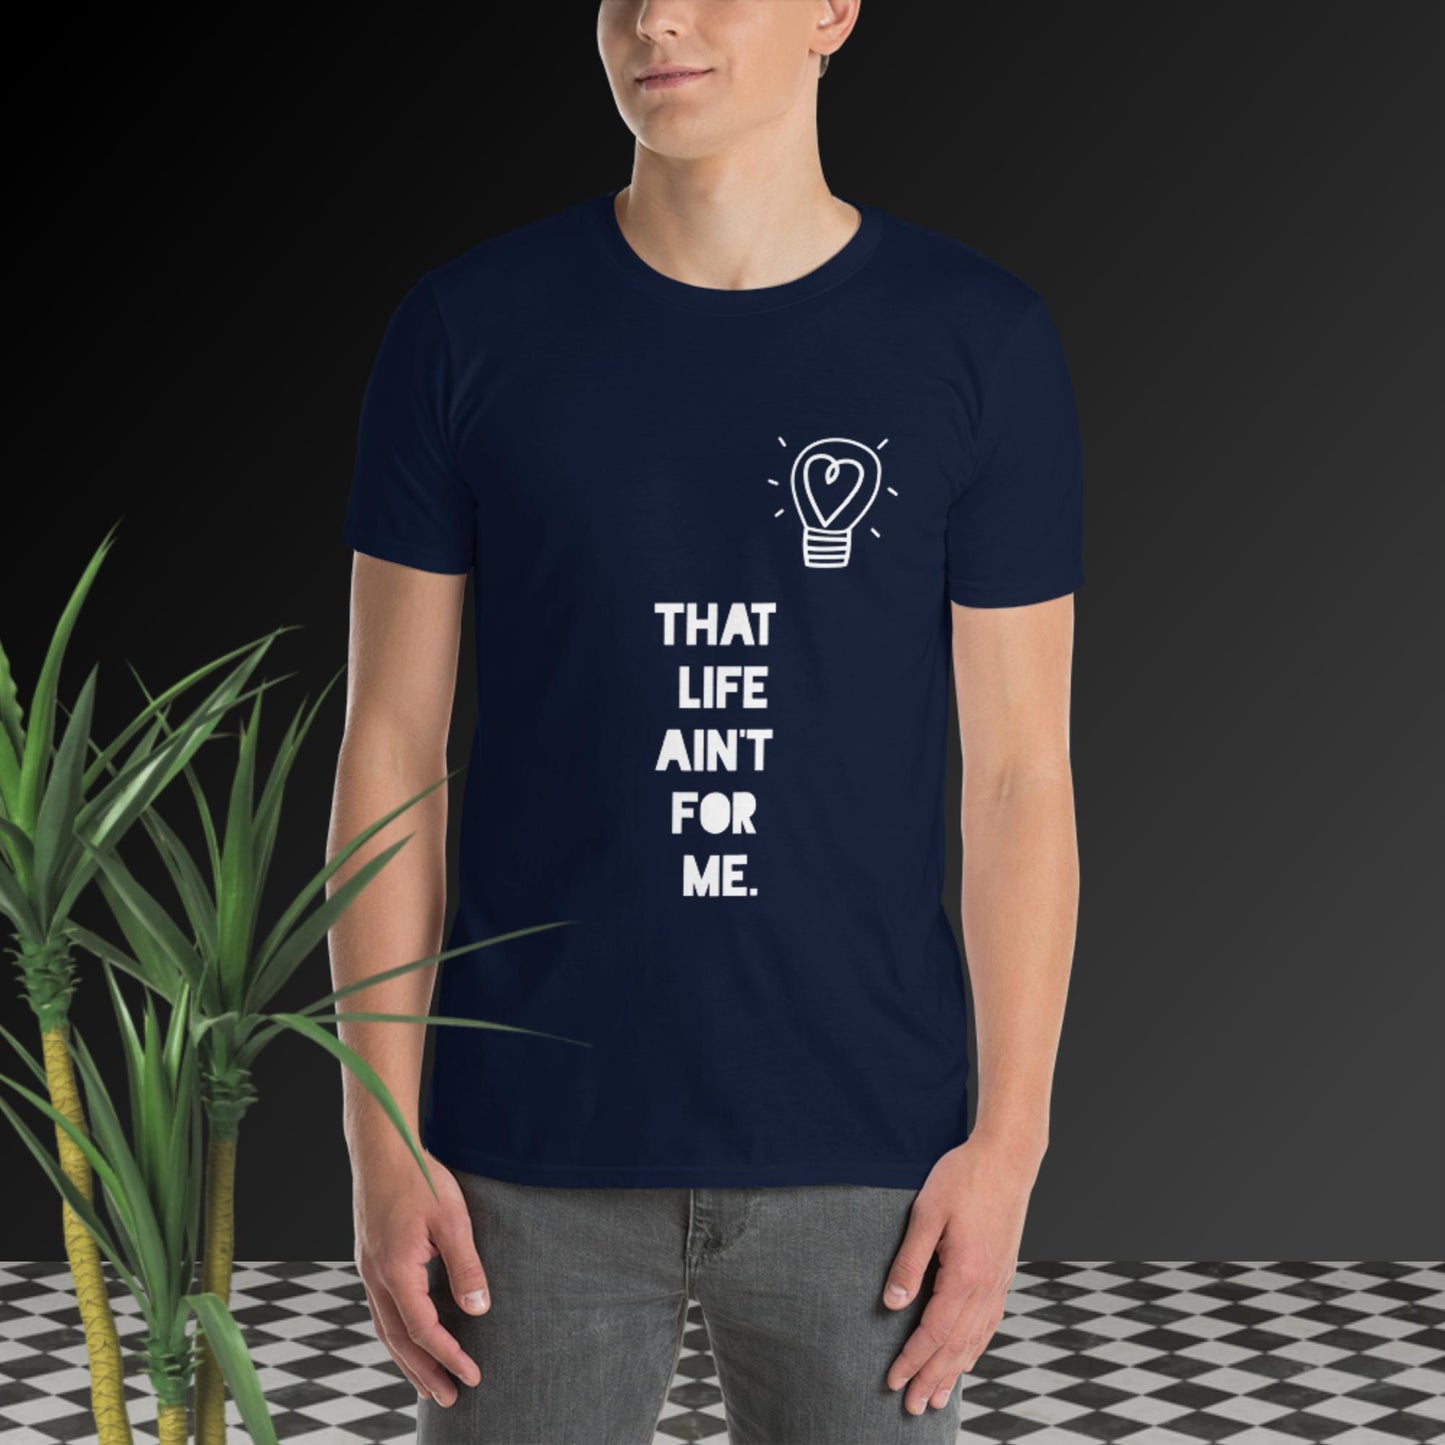 That Life Ain't For Me Short-Sleeve Unisex T-Shirt